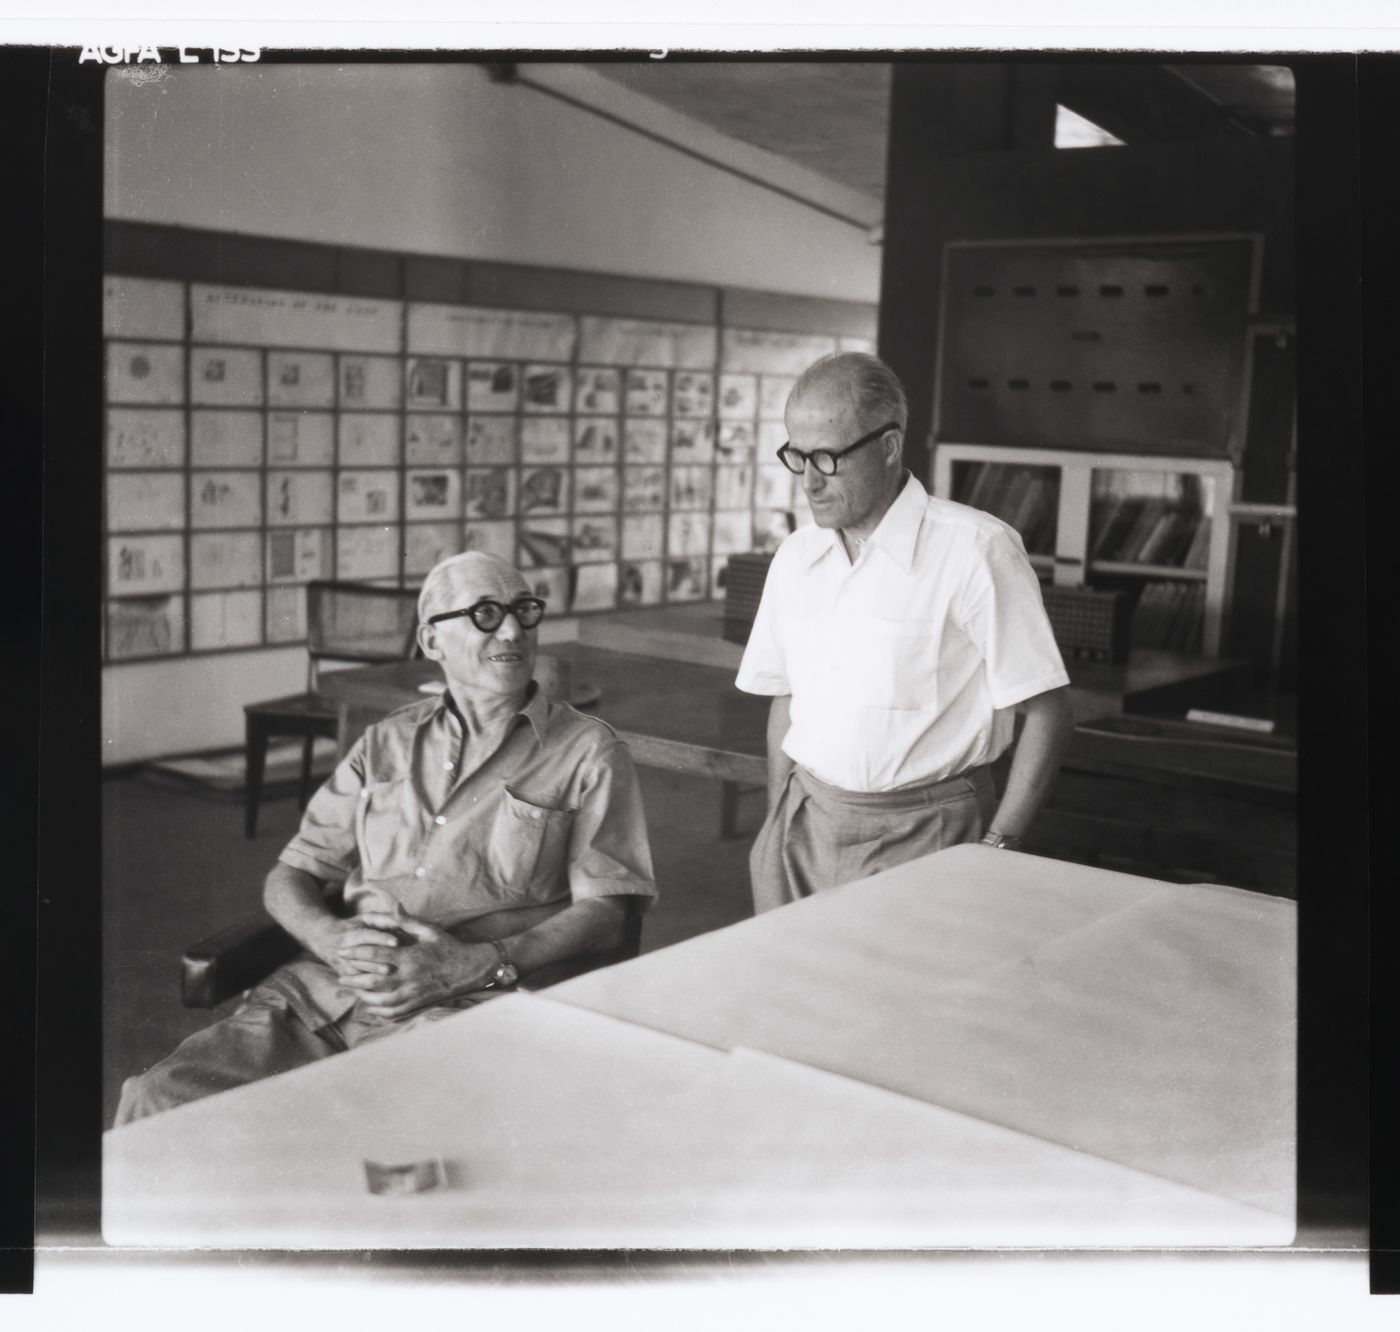 Photographs of Le Corbusier and Pierre Jeanneret in the Architects' office in Chandigarh, India